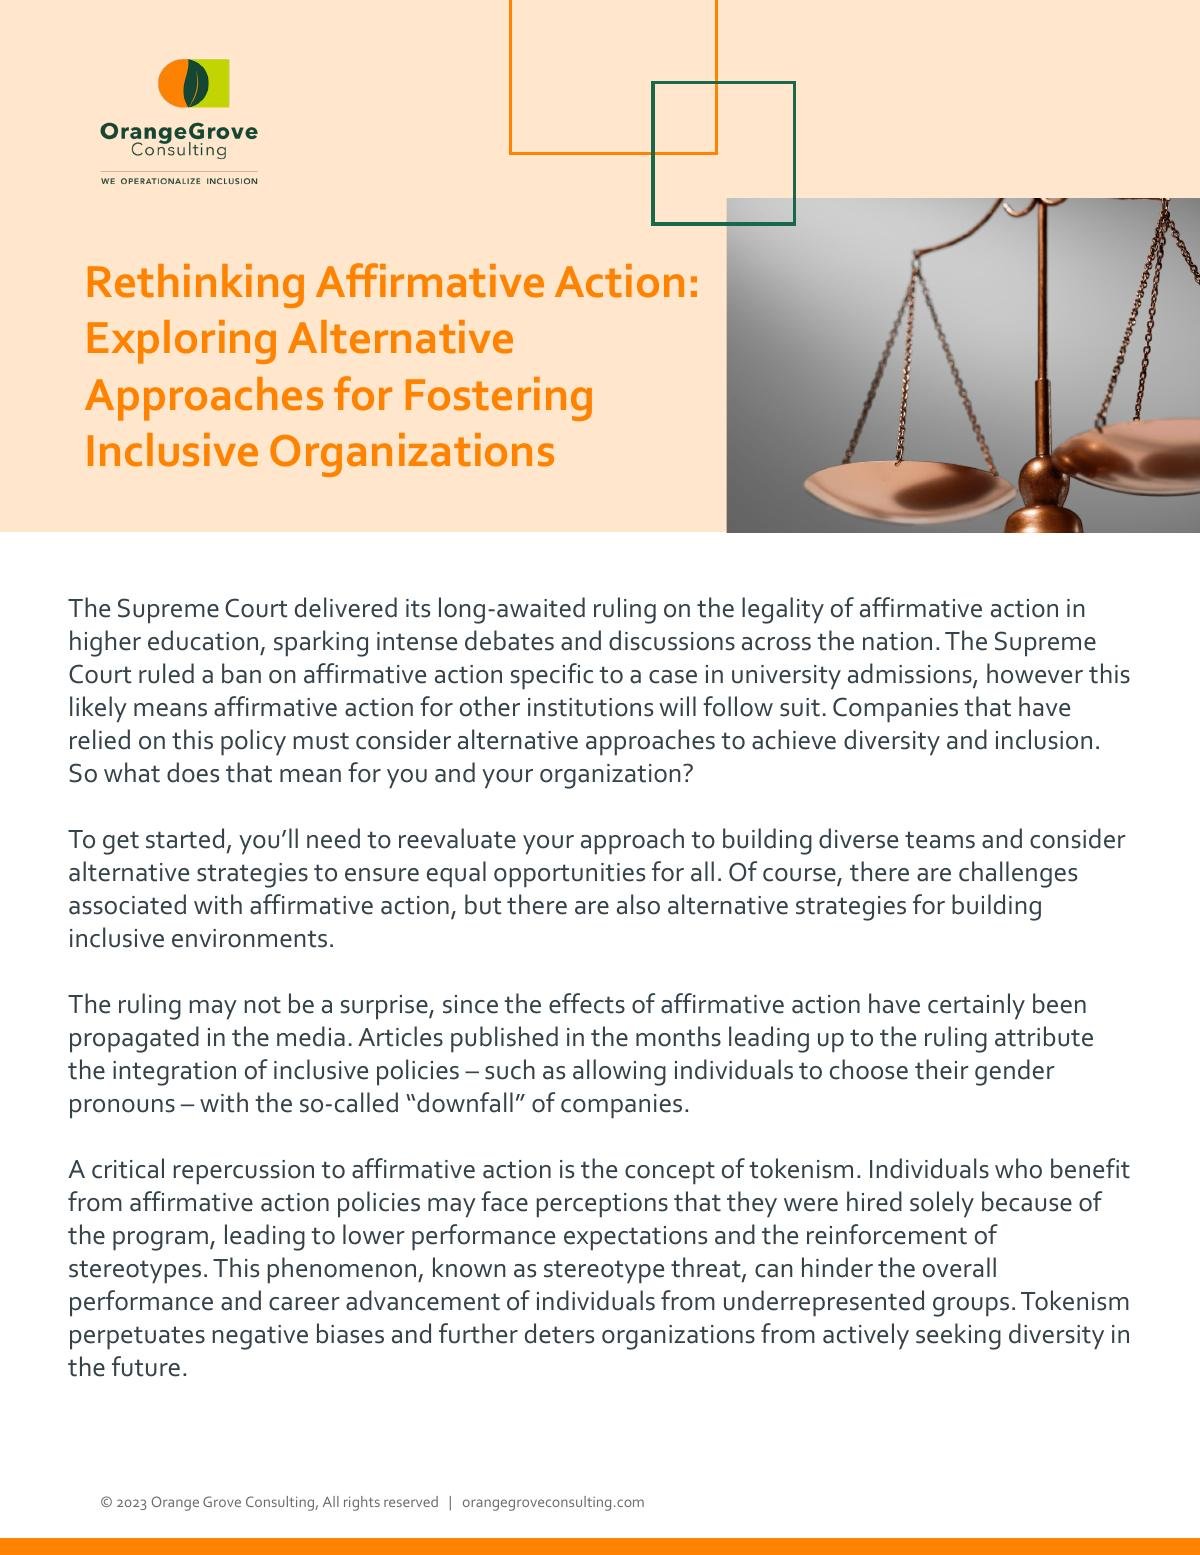 Rethinking Affirmative Action: Exploring Alternative Approaches for Fostering Inclusive Organization